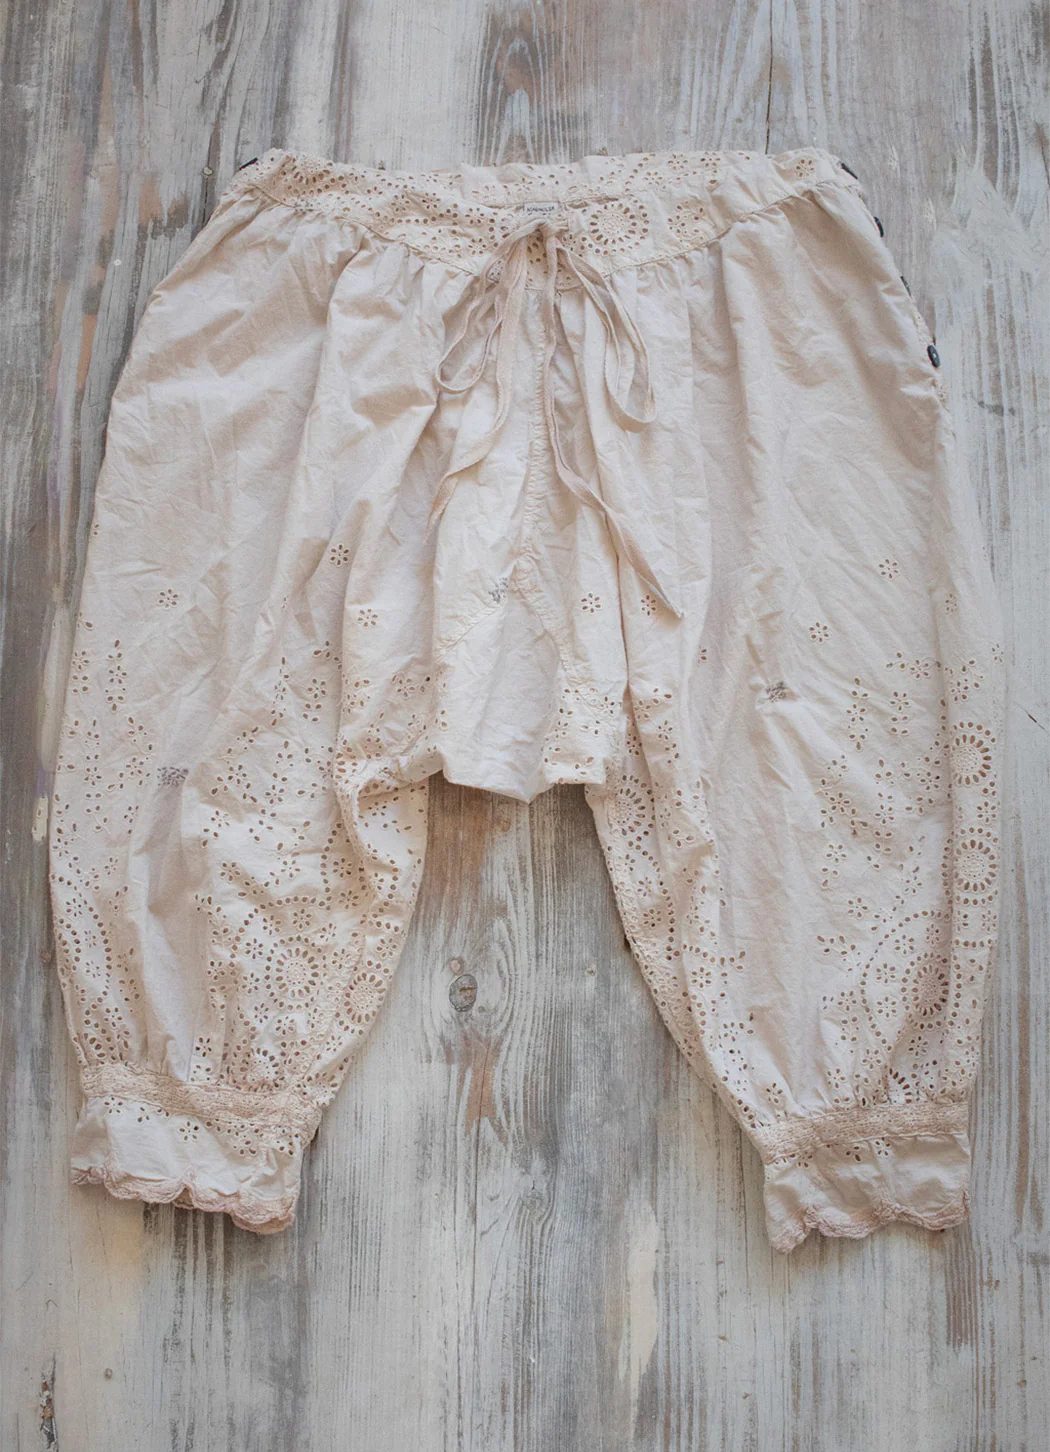 Magnolia Pearl European Cotton Eyelet Lucia Bloomers with Drawstring Laces in Moonlight Bloomers 199